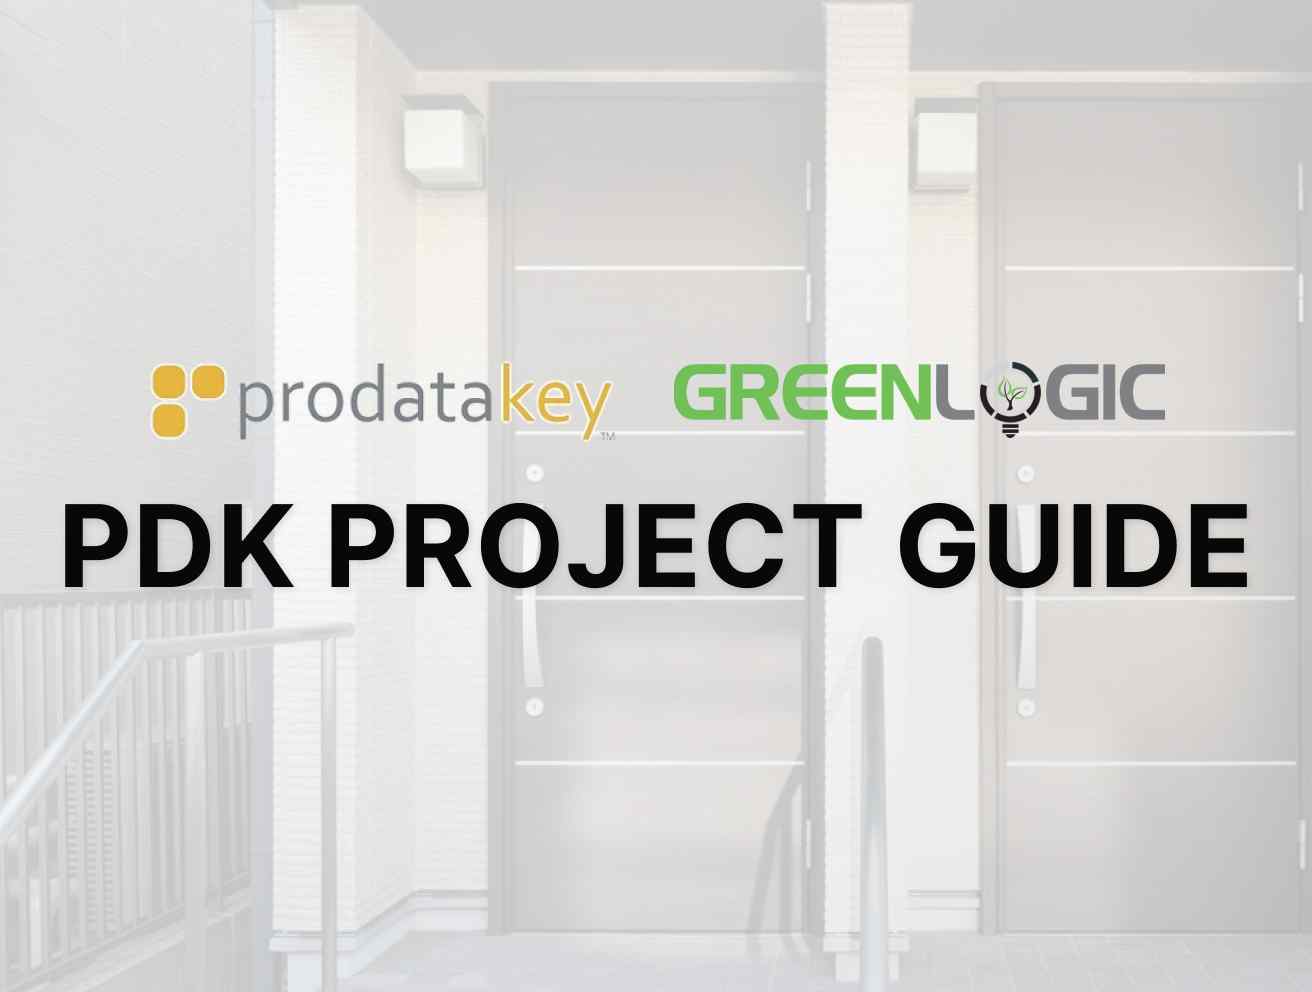 PDK and Greenlogic logos with "PDK Project Guide" title and home entry doors background.